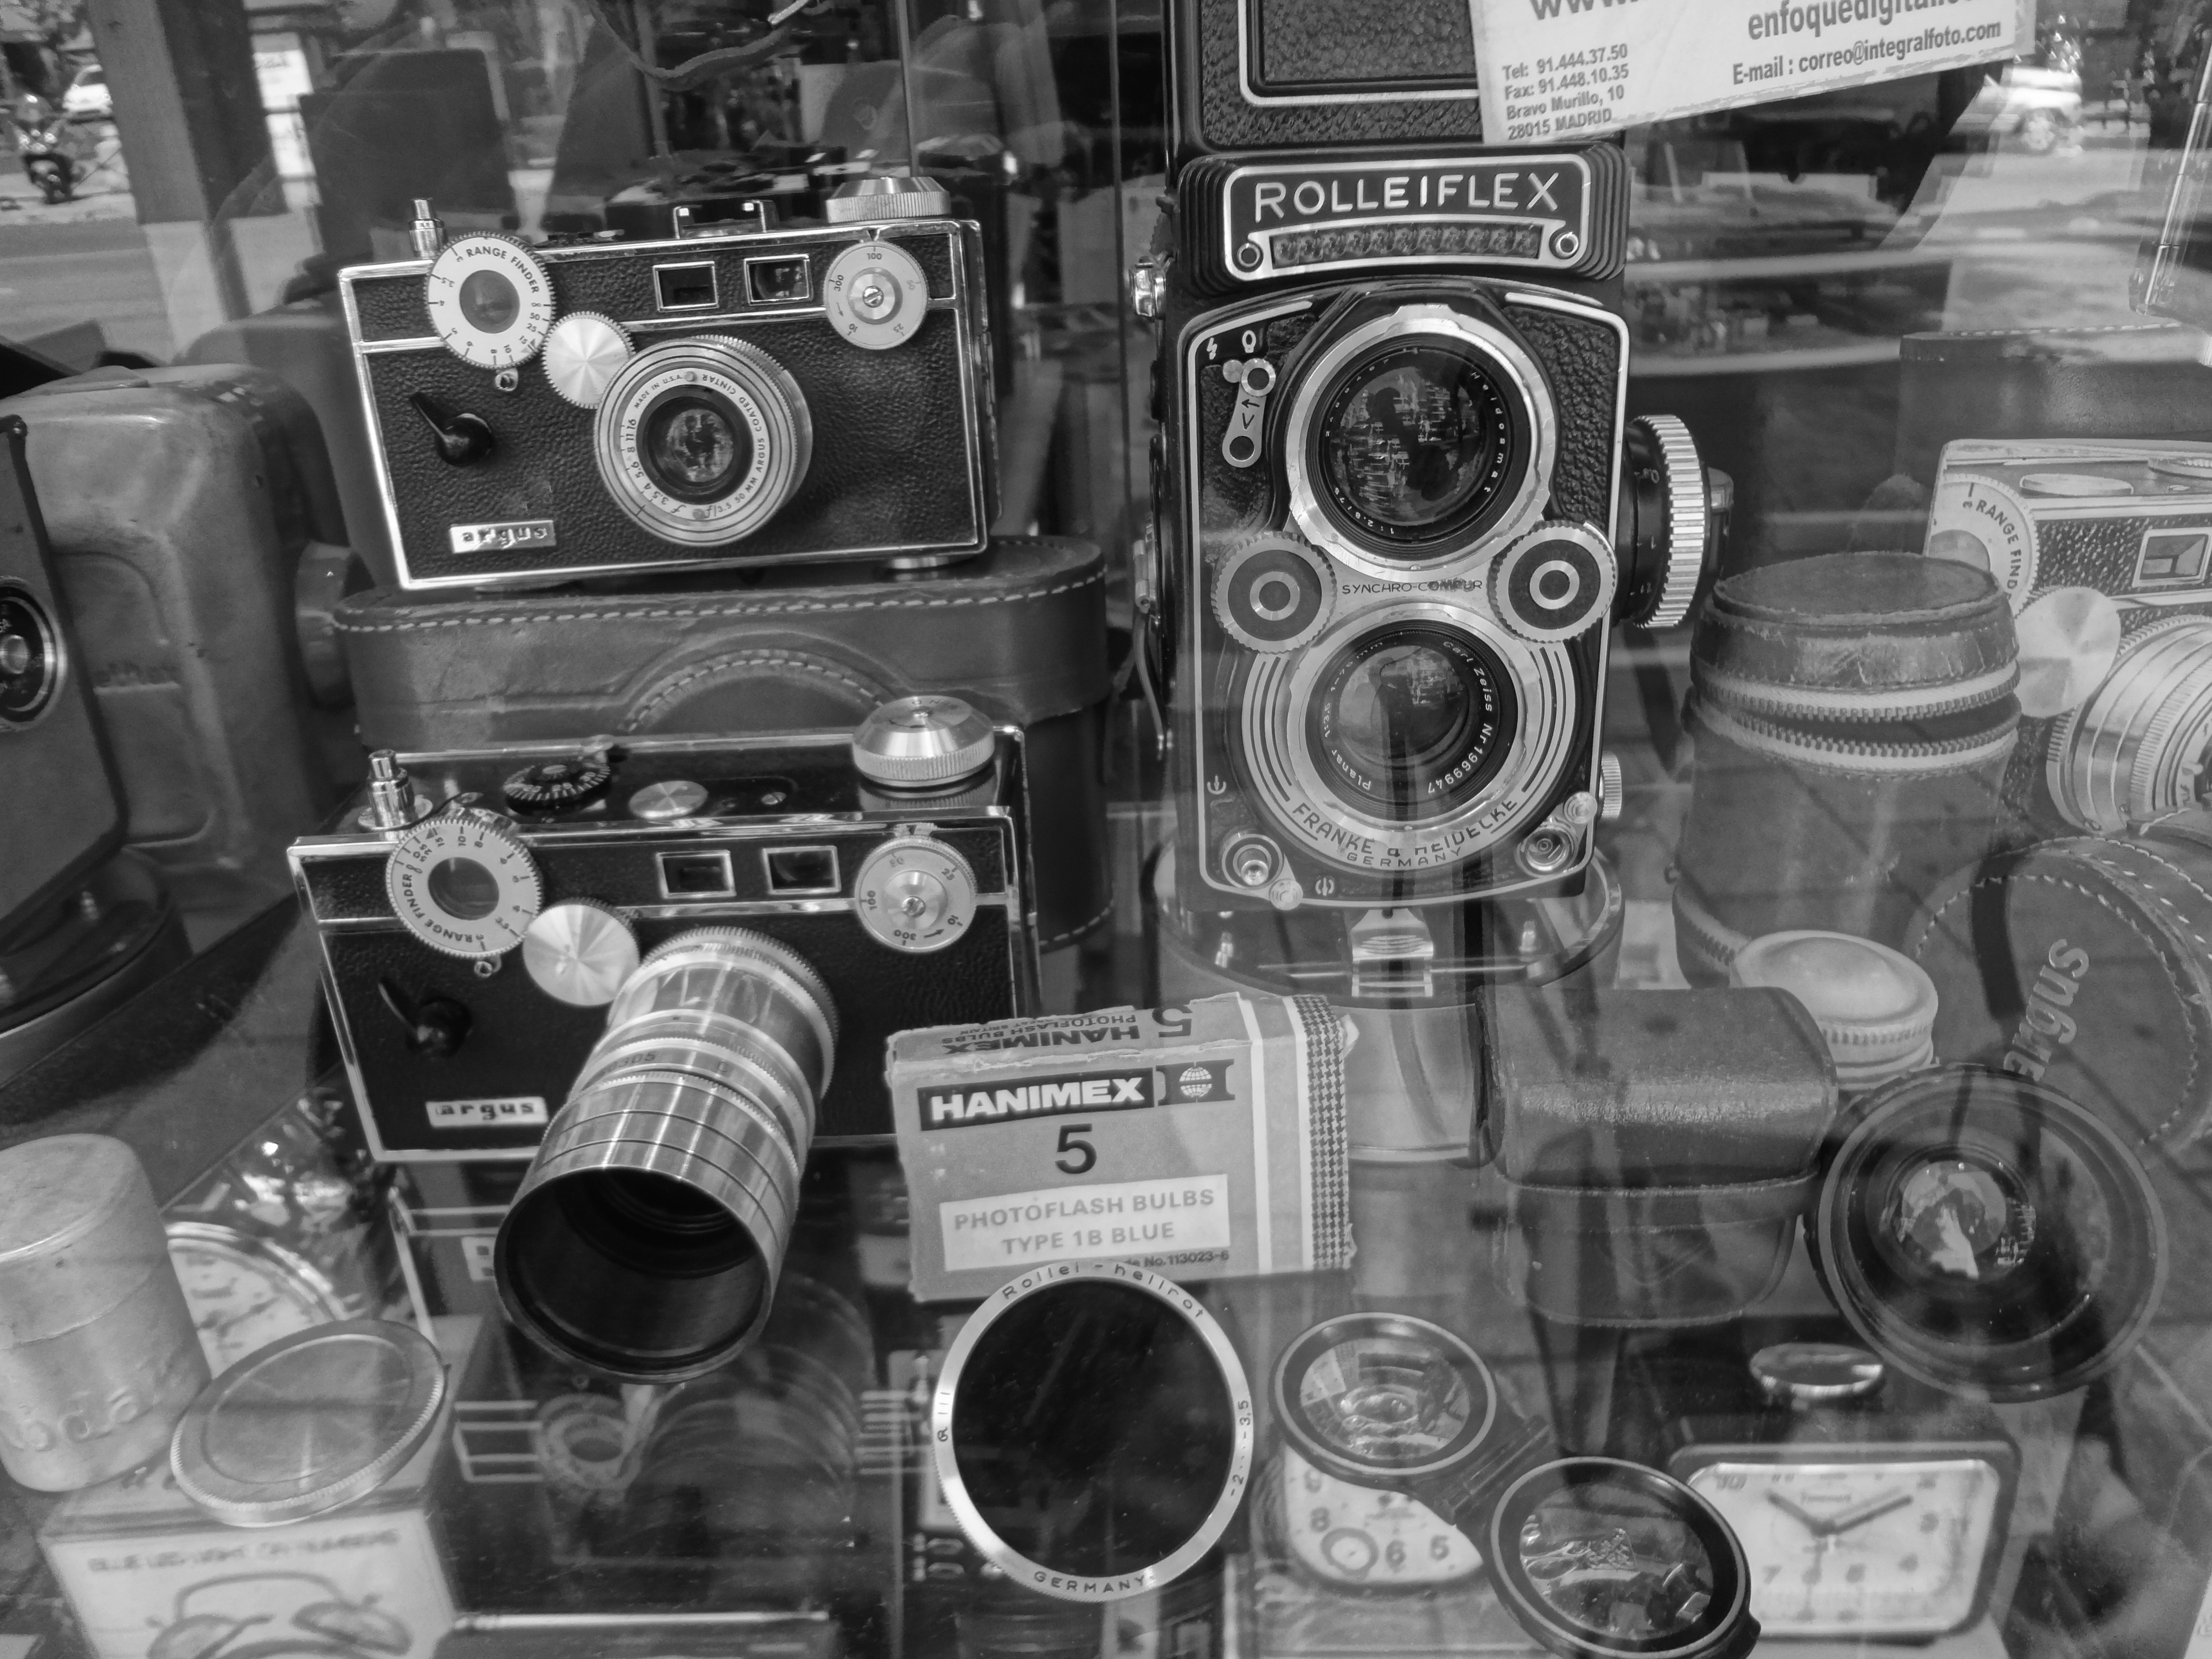 Antique Rolleiflex and other cameras for sale in Madrid, Spain